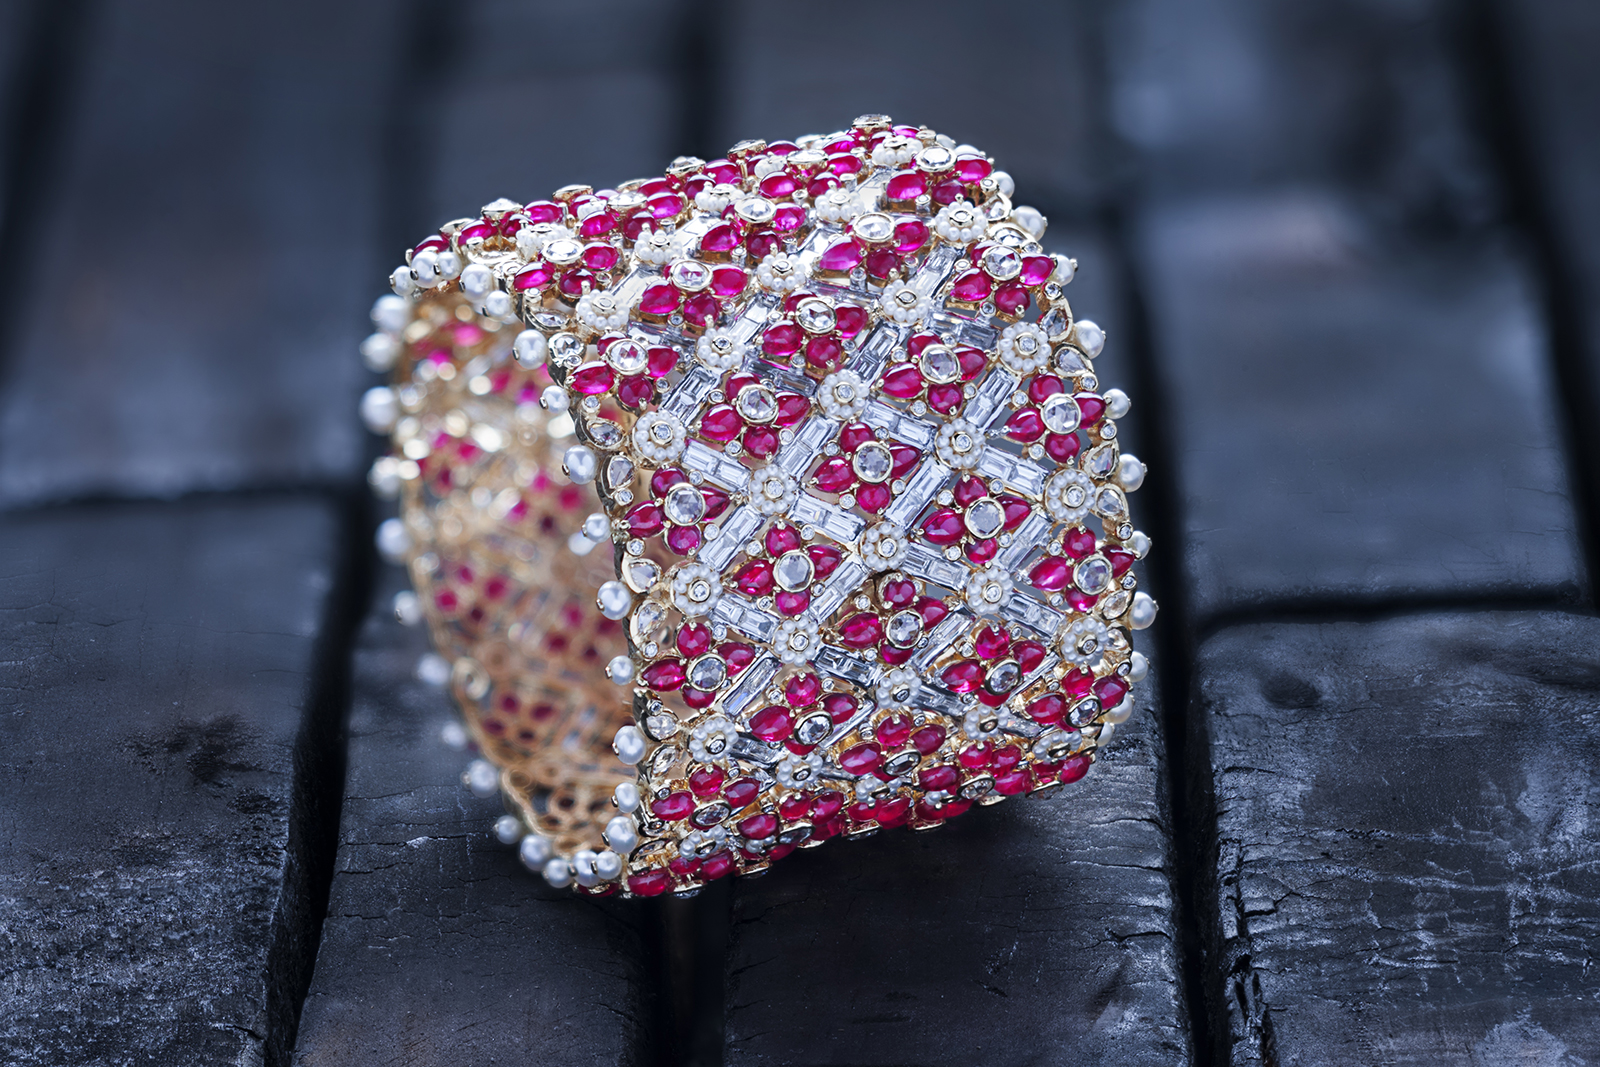 Moksh cuff from the 'Empress' collection in rubies and diamonds